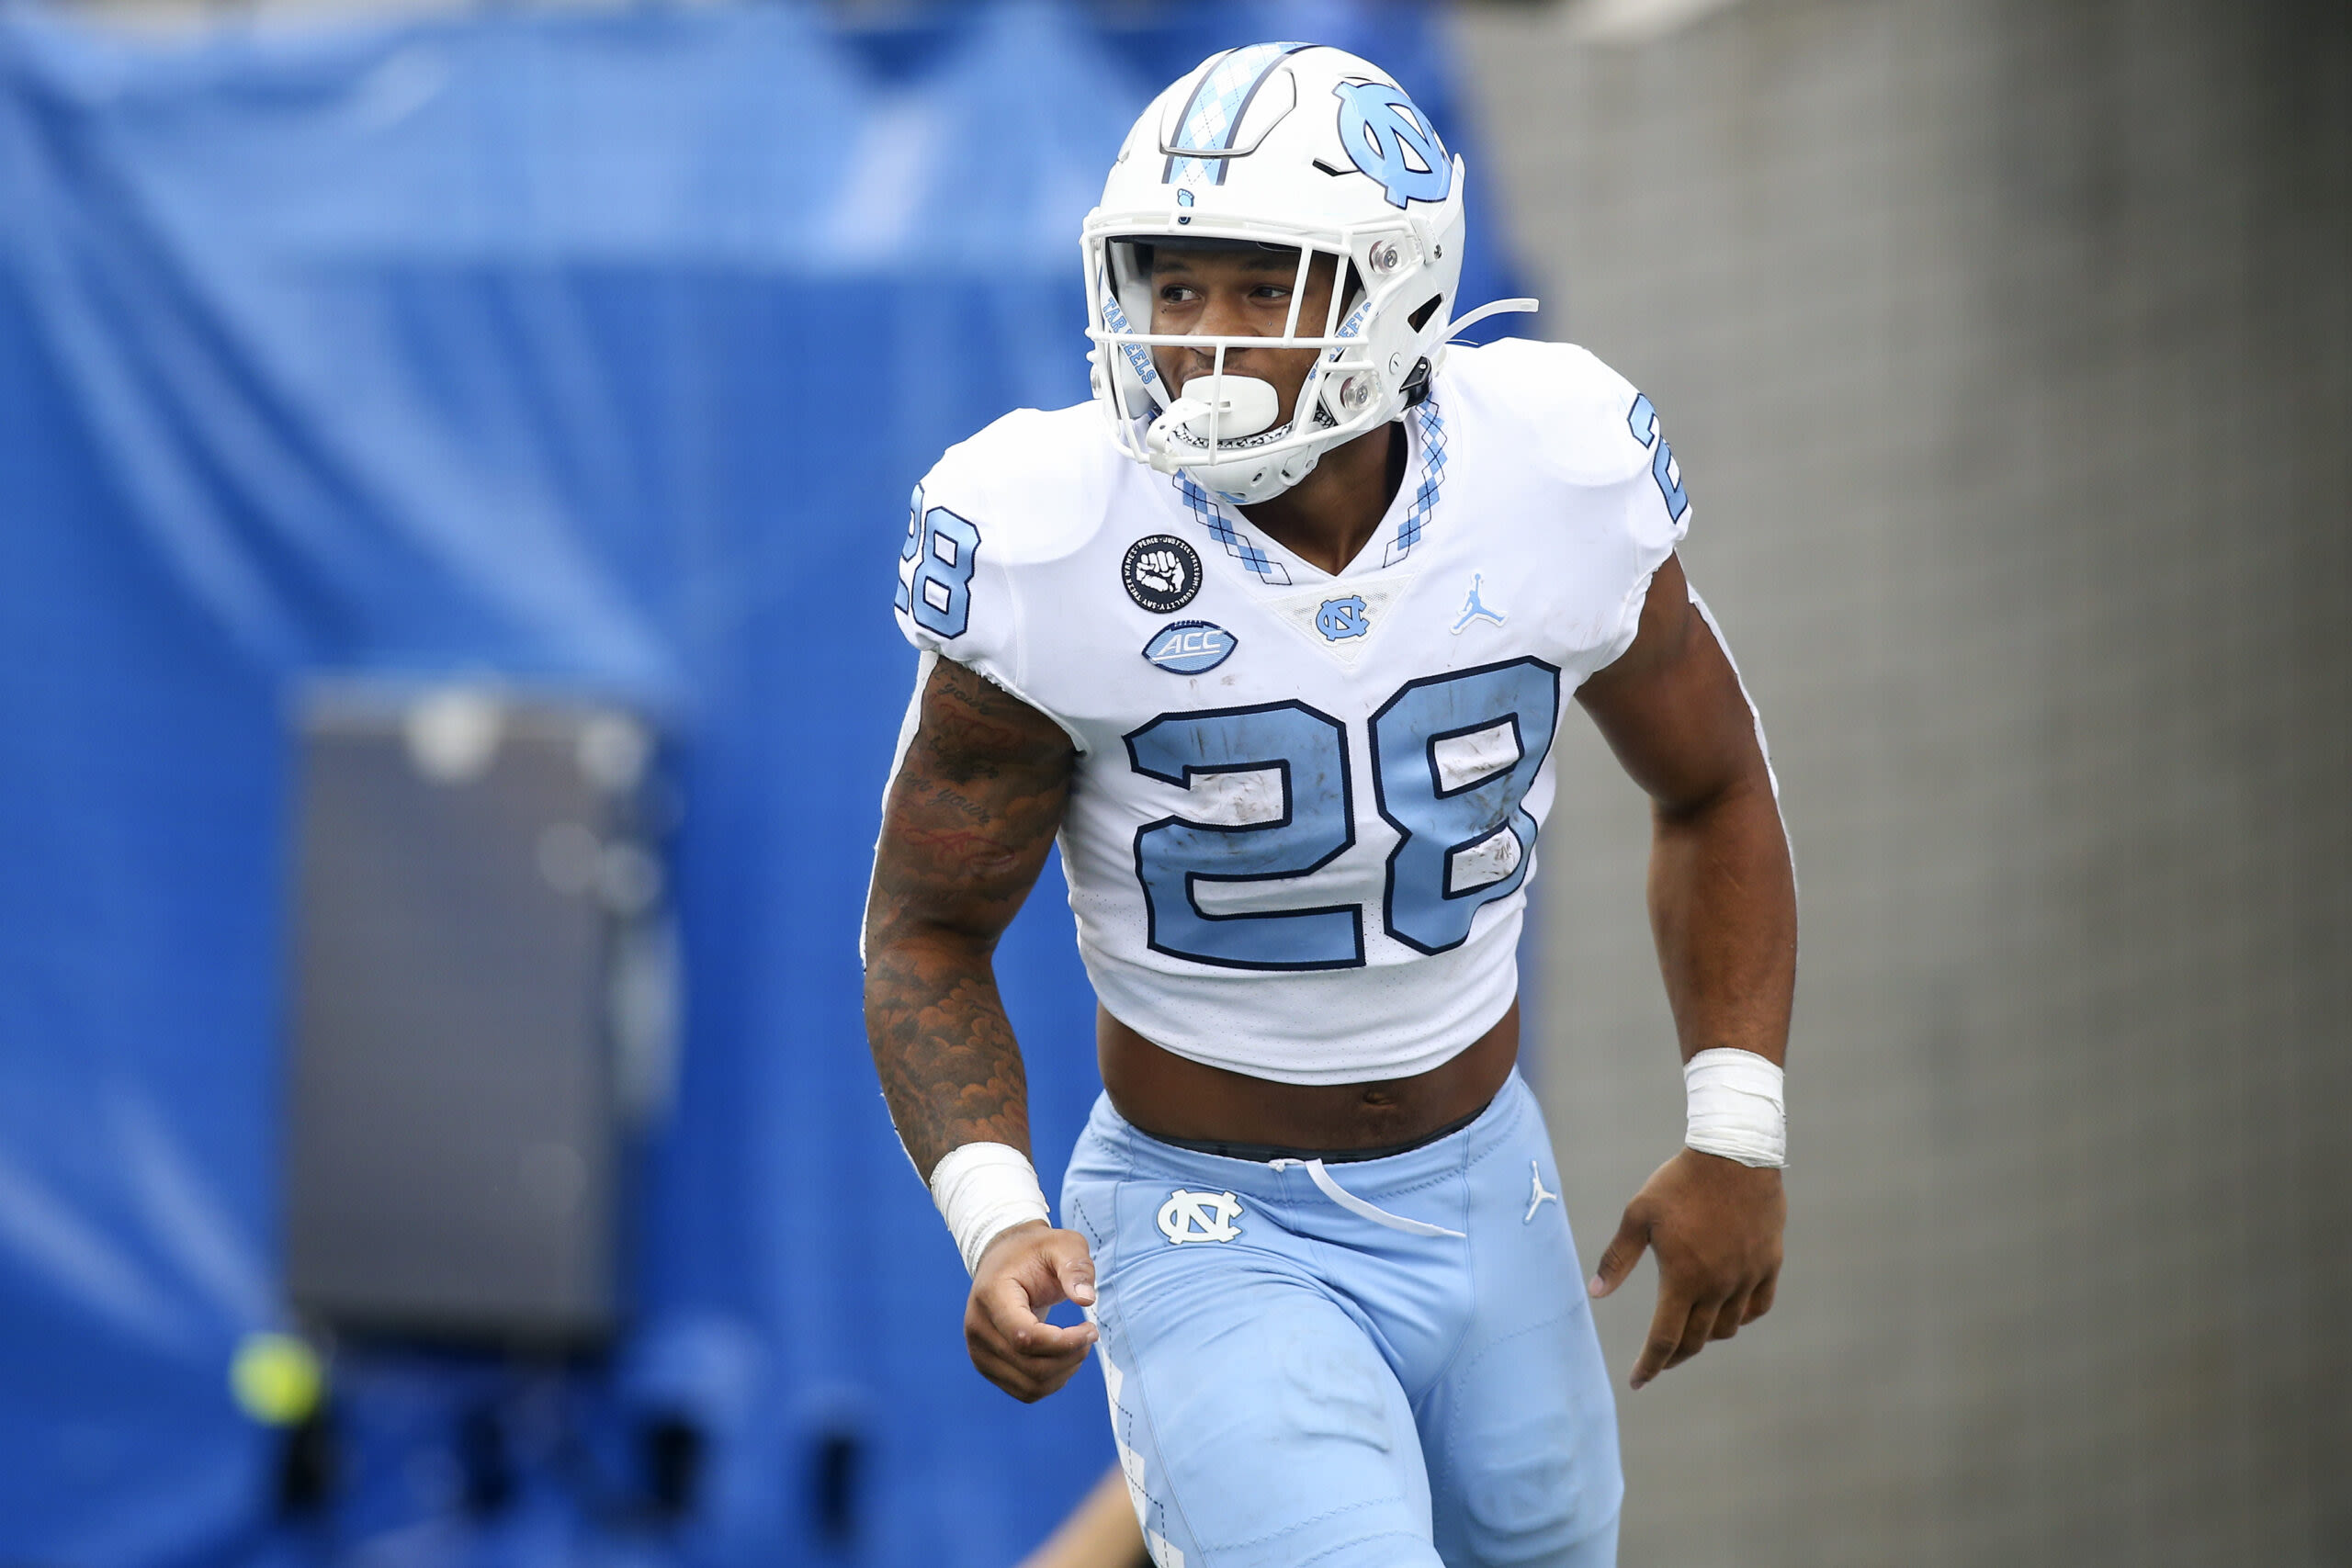 UNC running back Omarion Hampton ranked as a top player in ACC